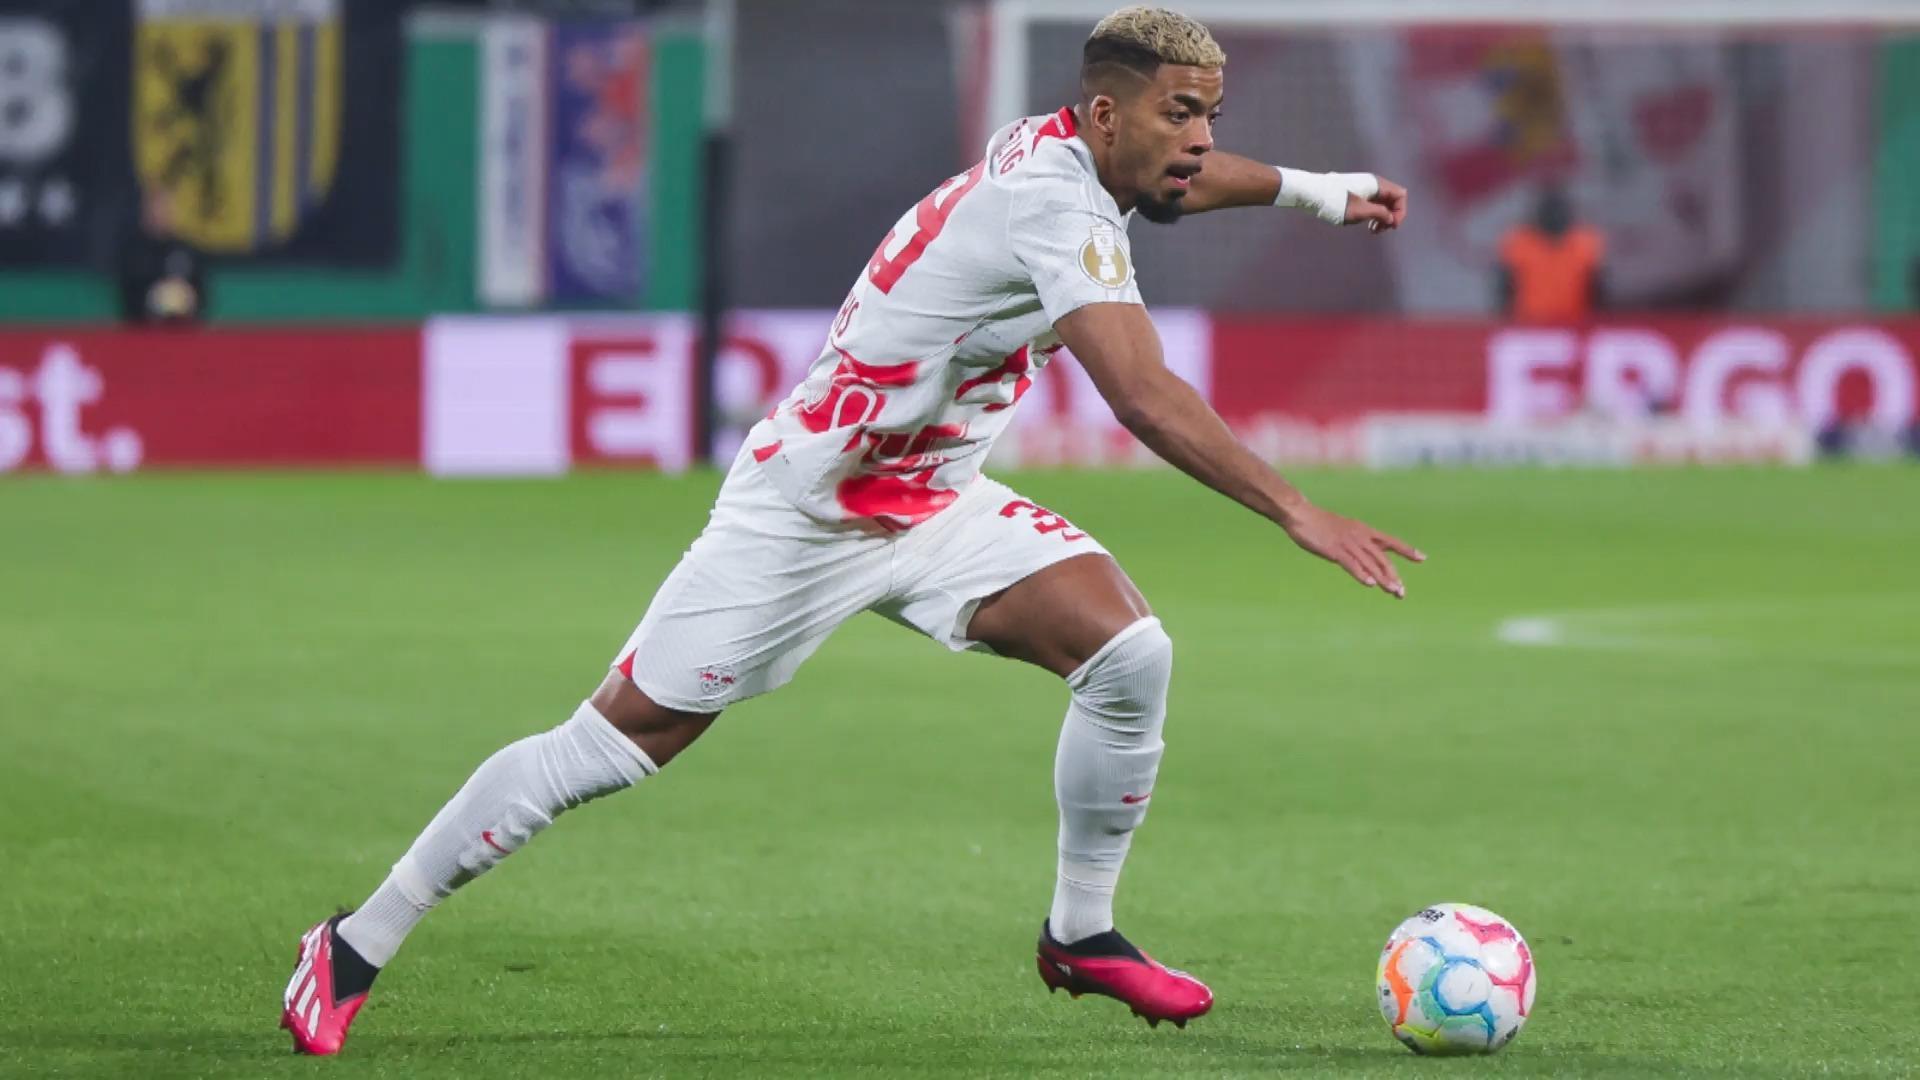 Henrichs becomes a target after Leipzig win against BVB Terrible hate comments!